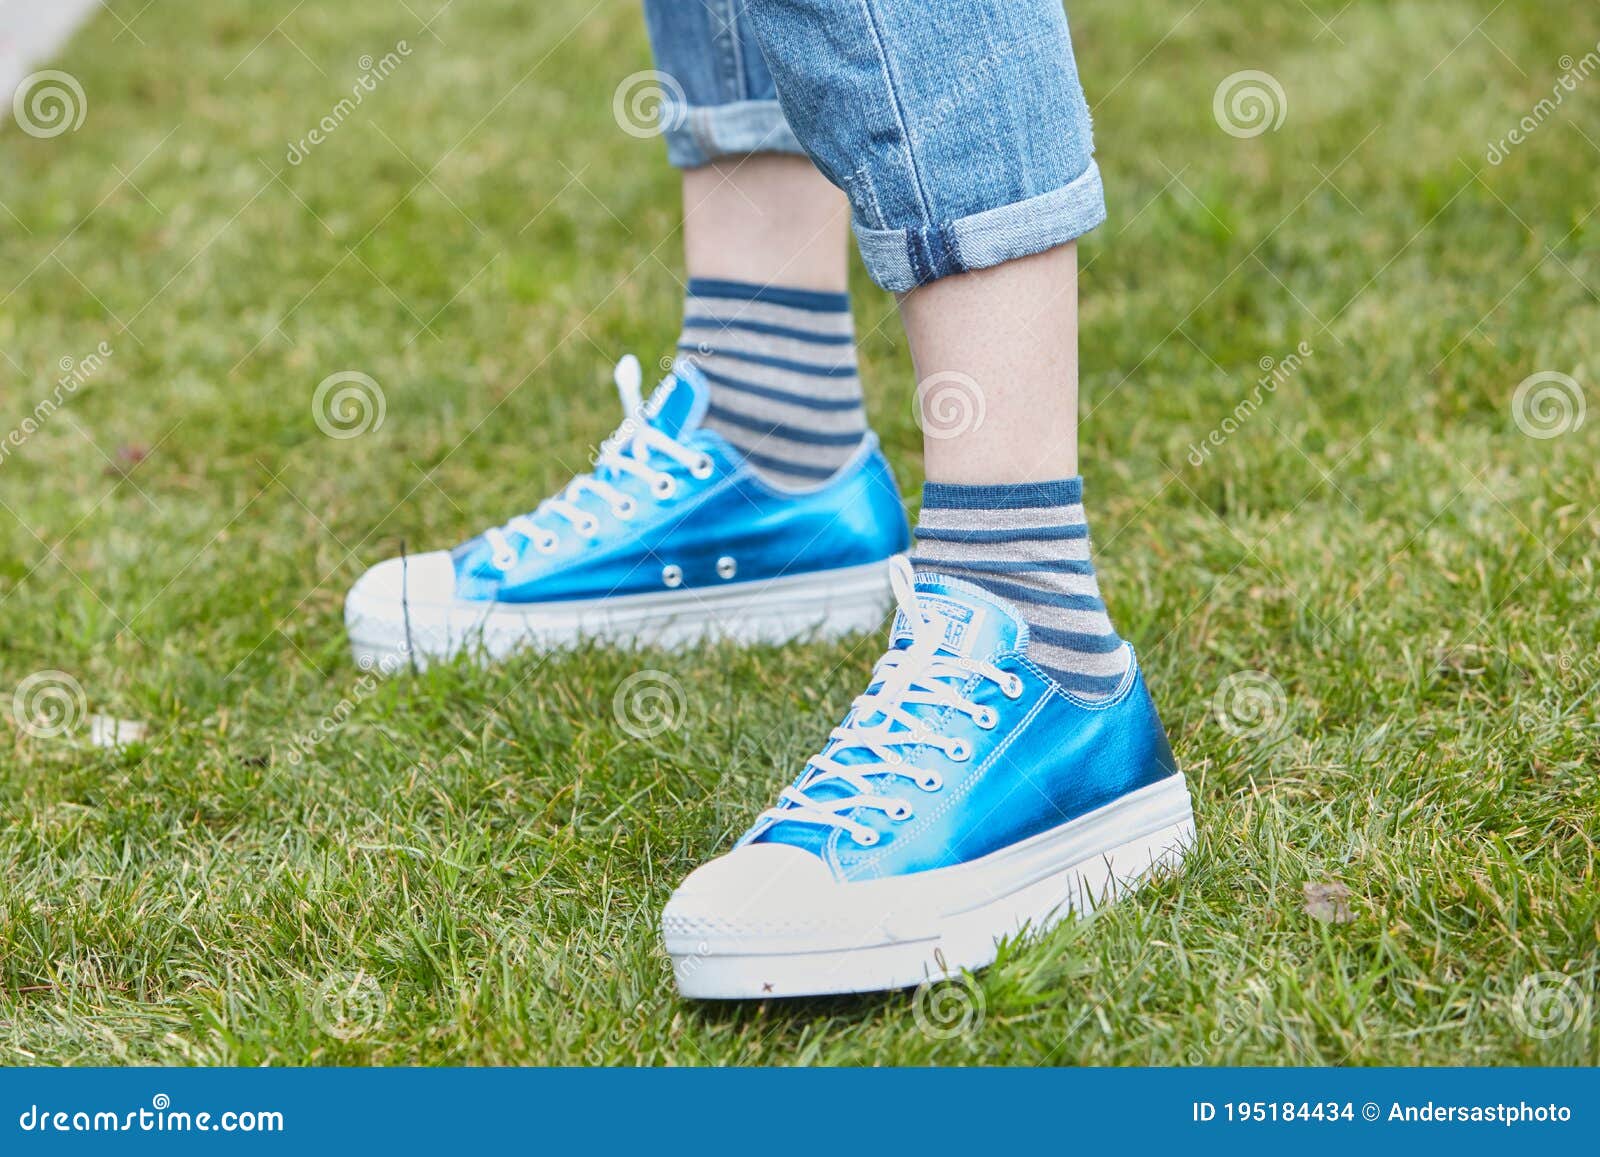 Woman with Converse All Stars Iridescent Blue Shoes before Emporio Armani  Fashion Show, Milan Fashion Week Editorial Stock Image - Image of sneakers,  fashion: 195184434